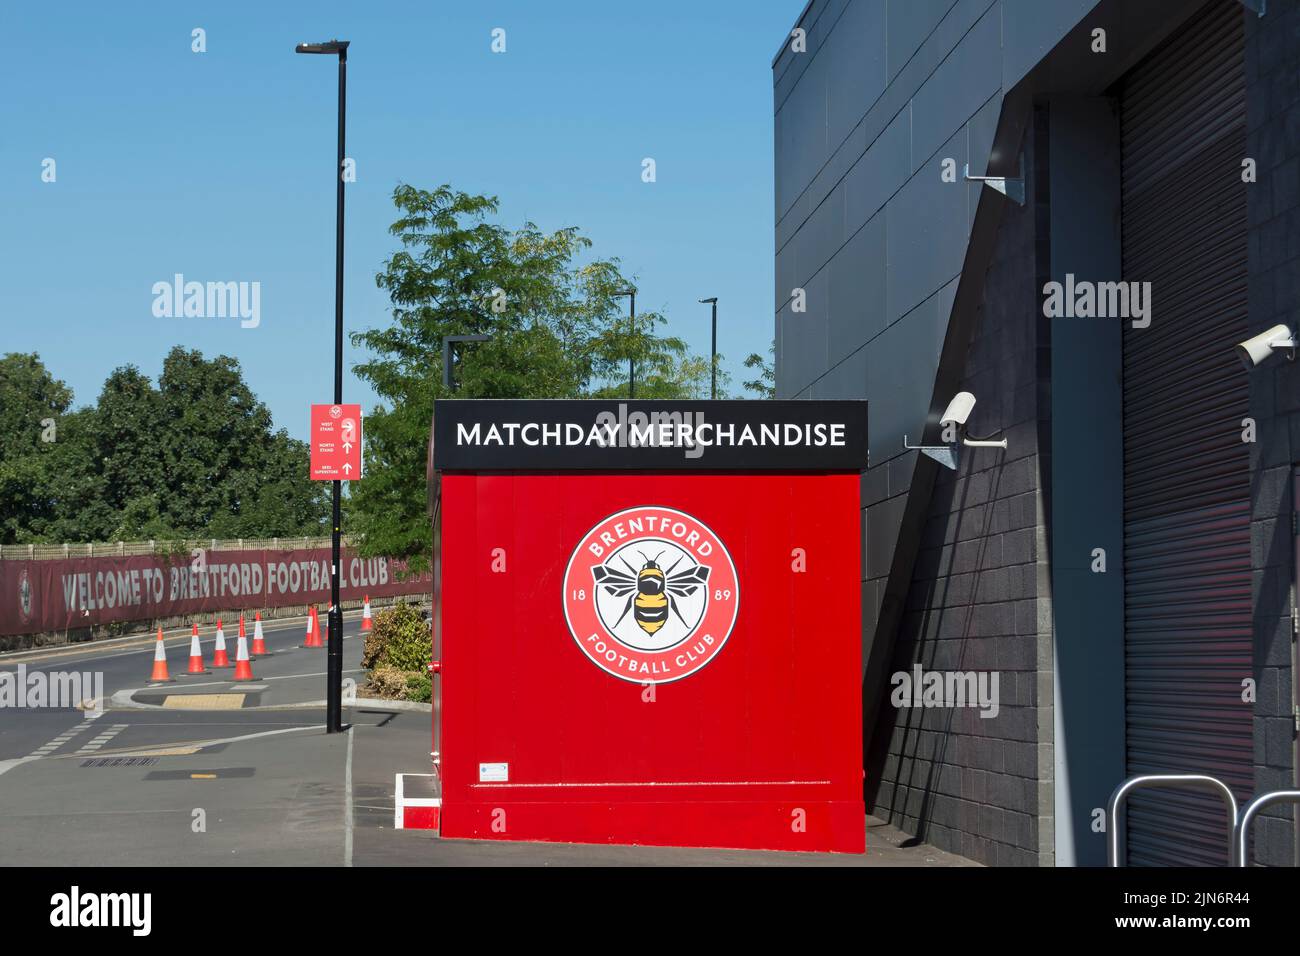 matchday merchandise kiosk outside the gtech community stadium, home of brentford fc, with welcome banner in background, brentford, london, england Stock Photo